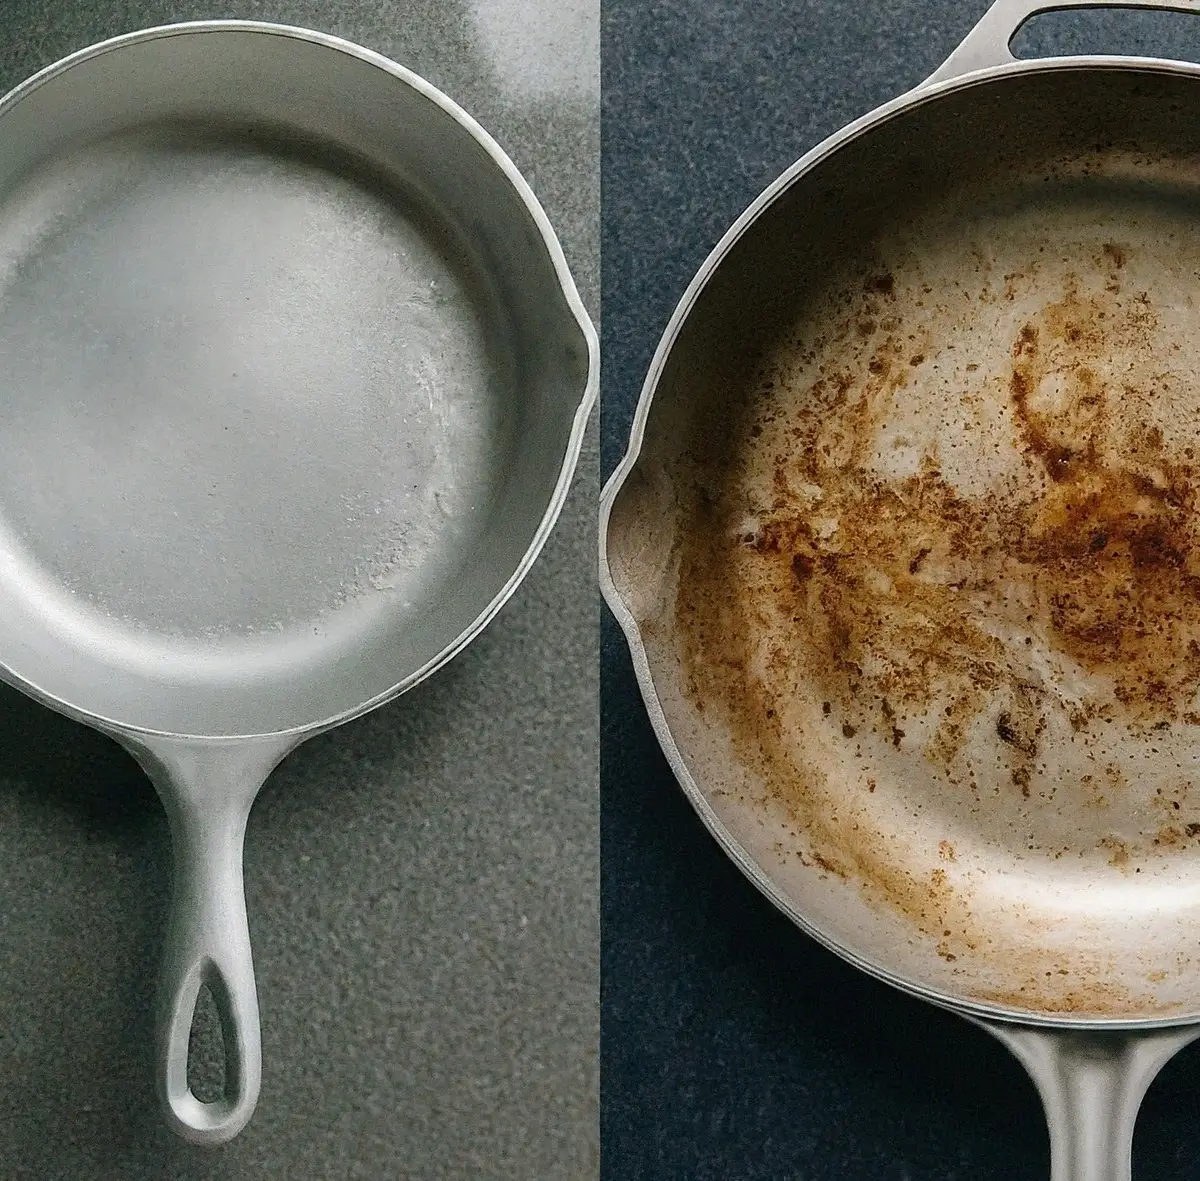 Cleaning the Cast Aluminum Cookware